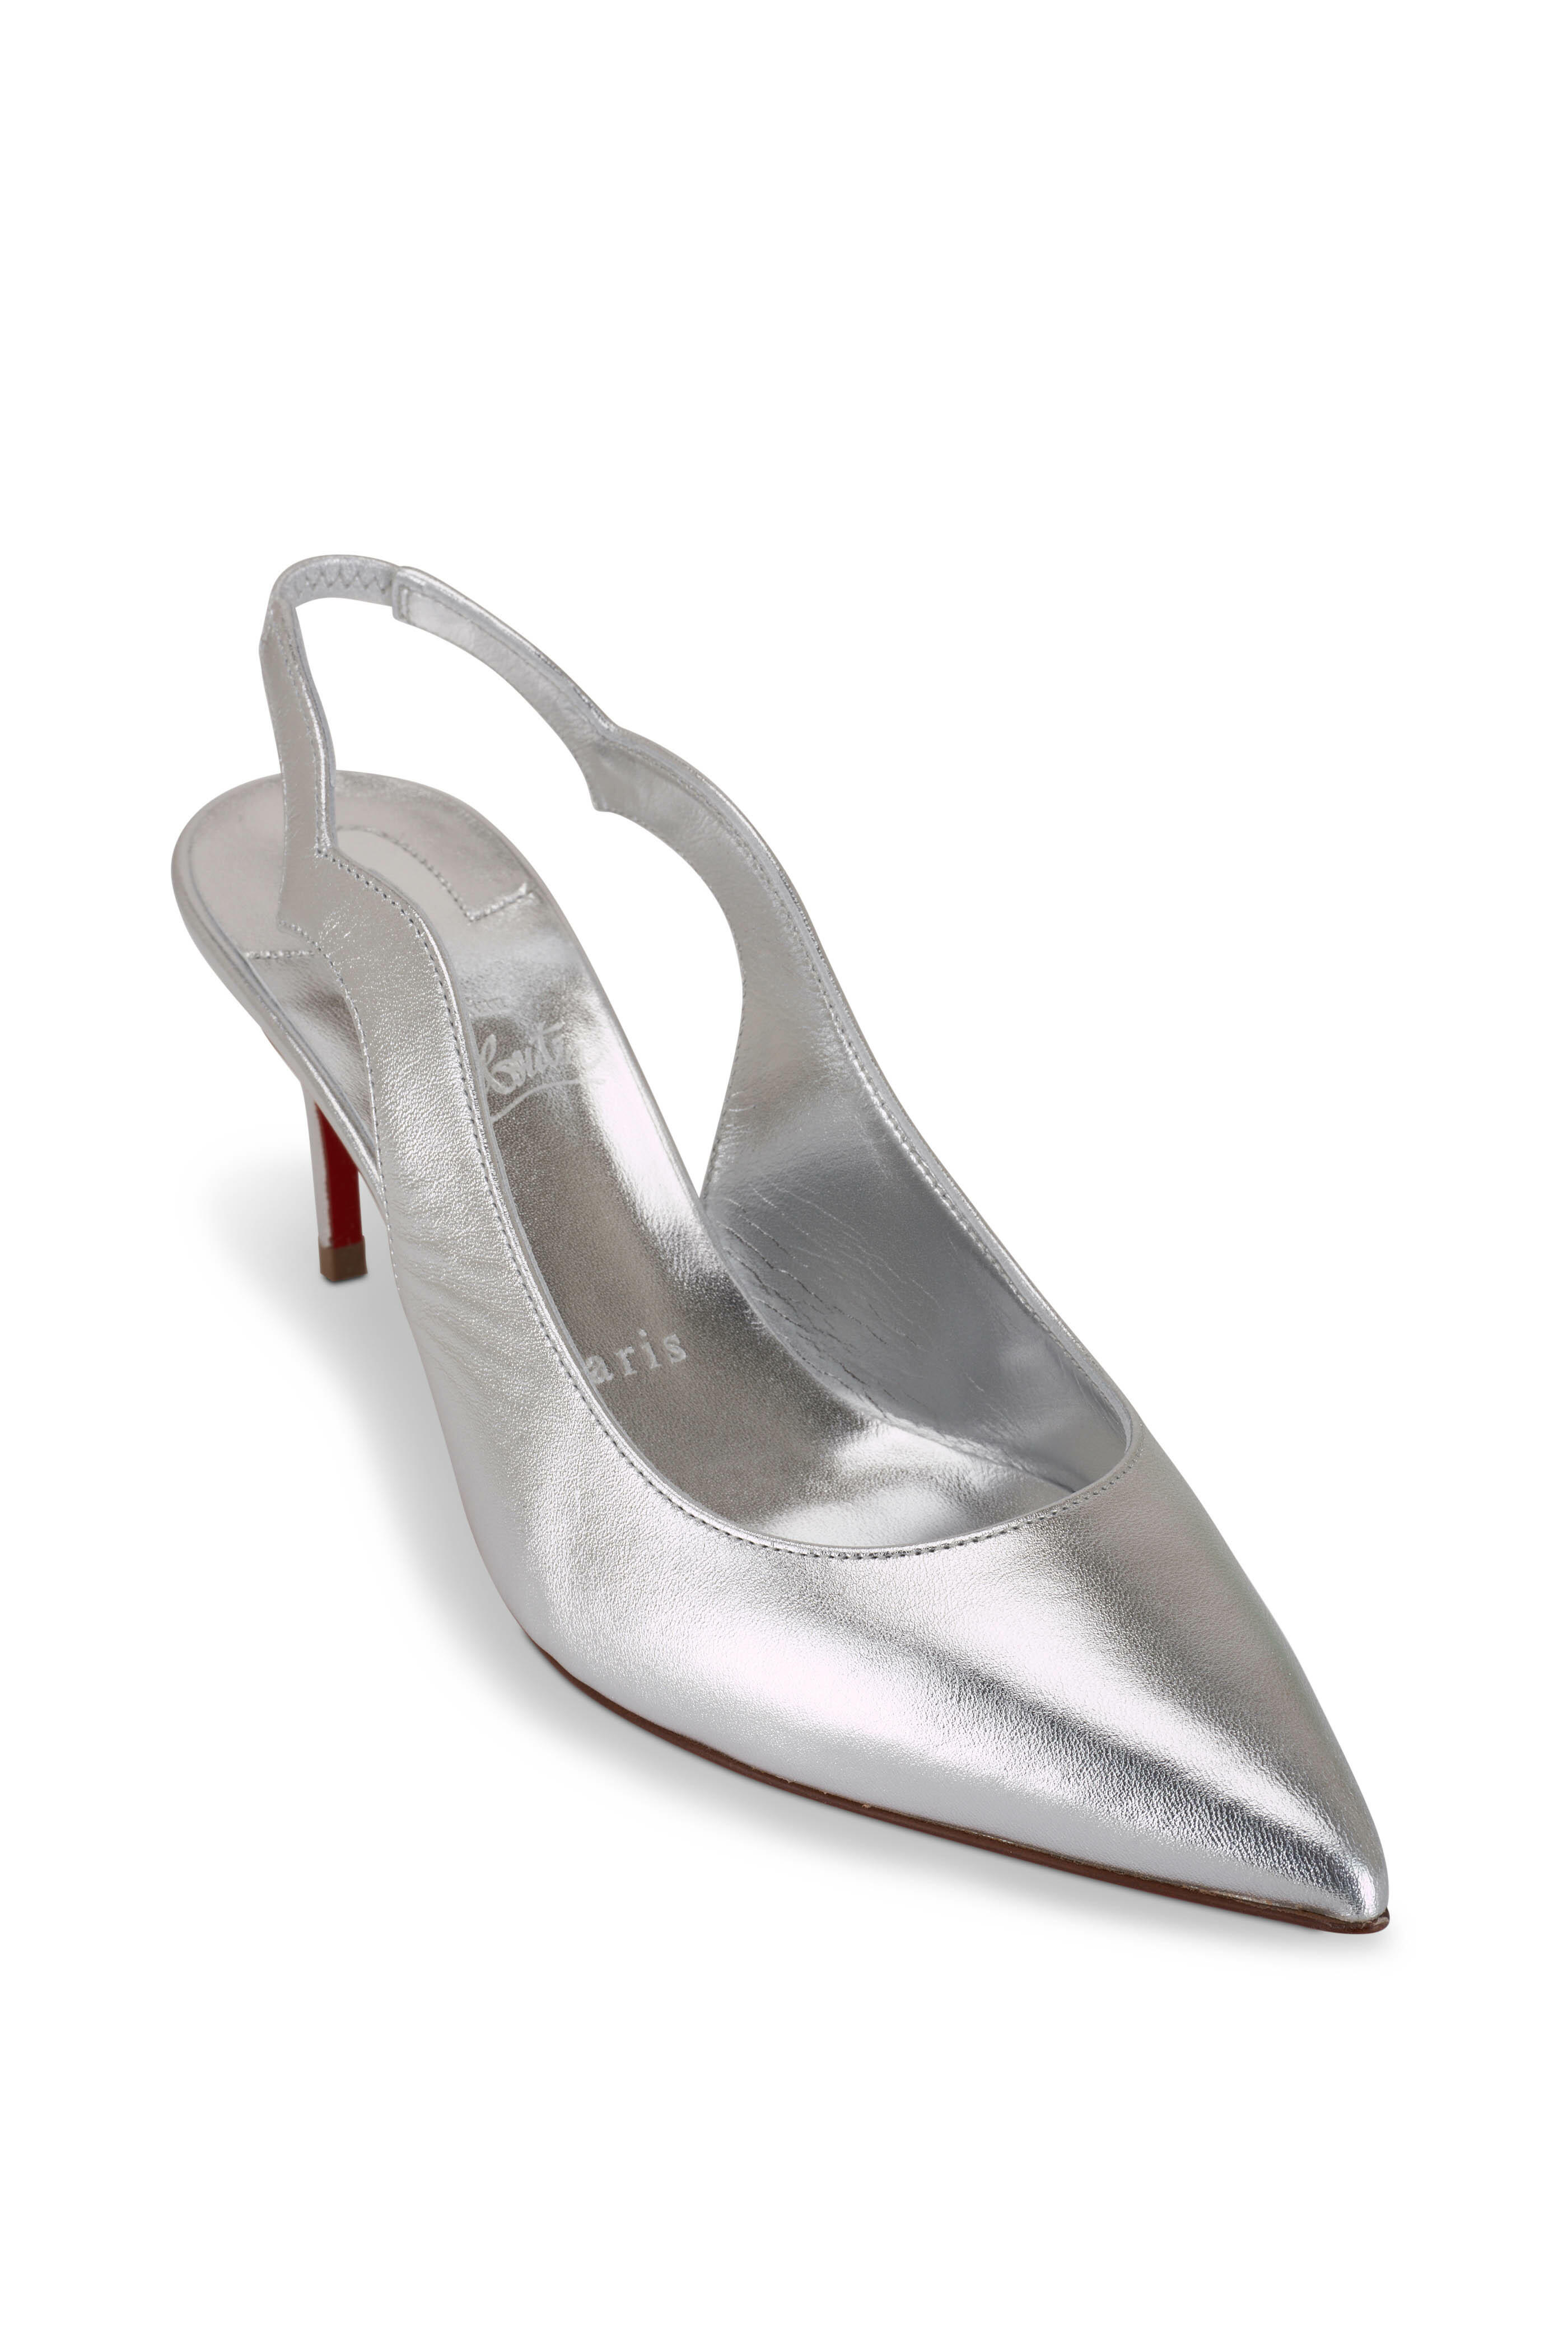 Christian Louboutin - Hot Chick Silver Leather Slingback Pump, 70mm